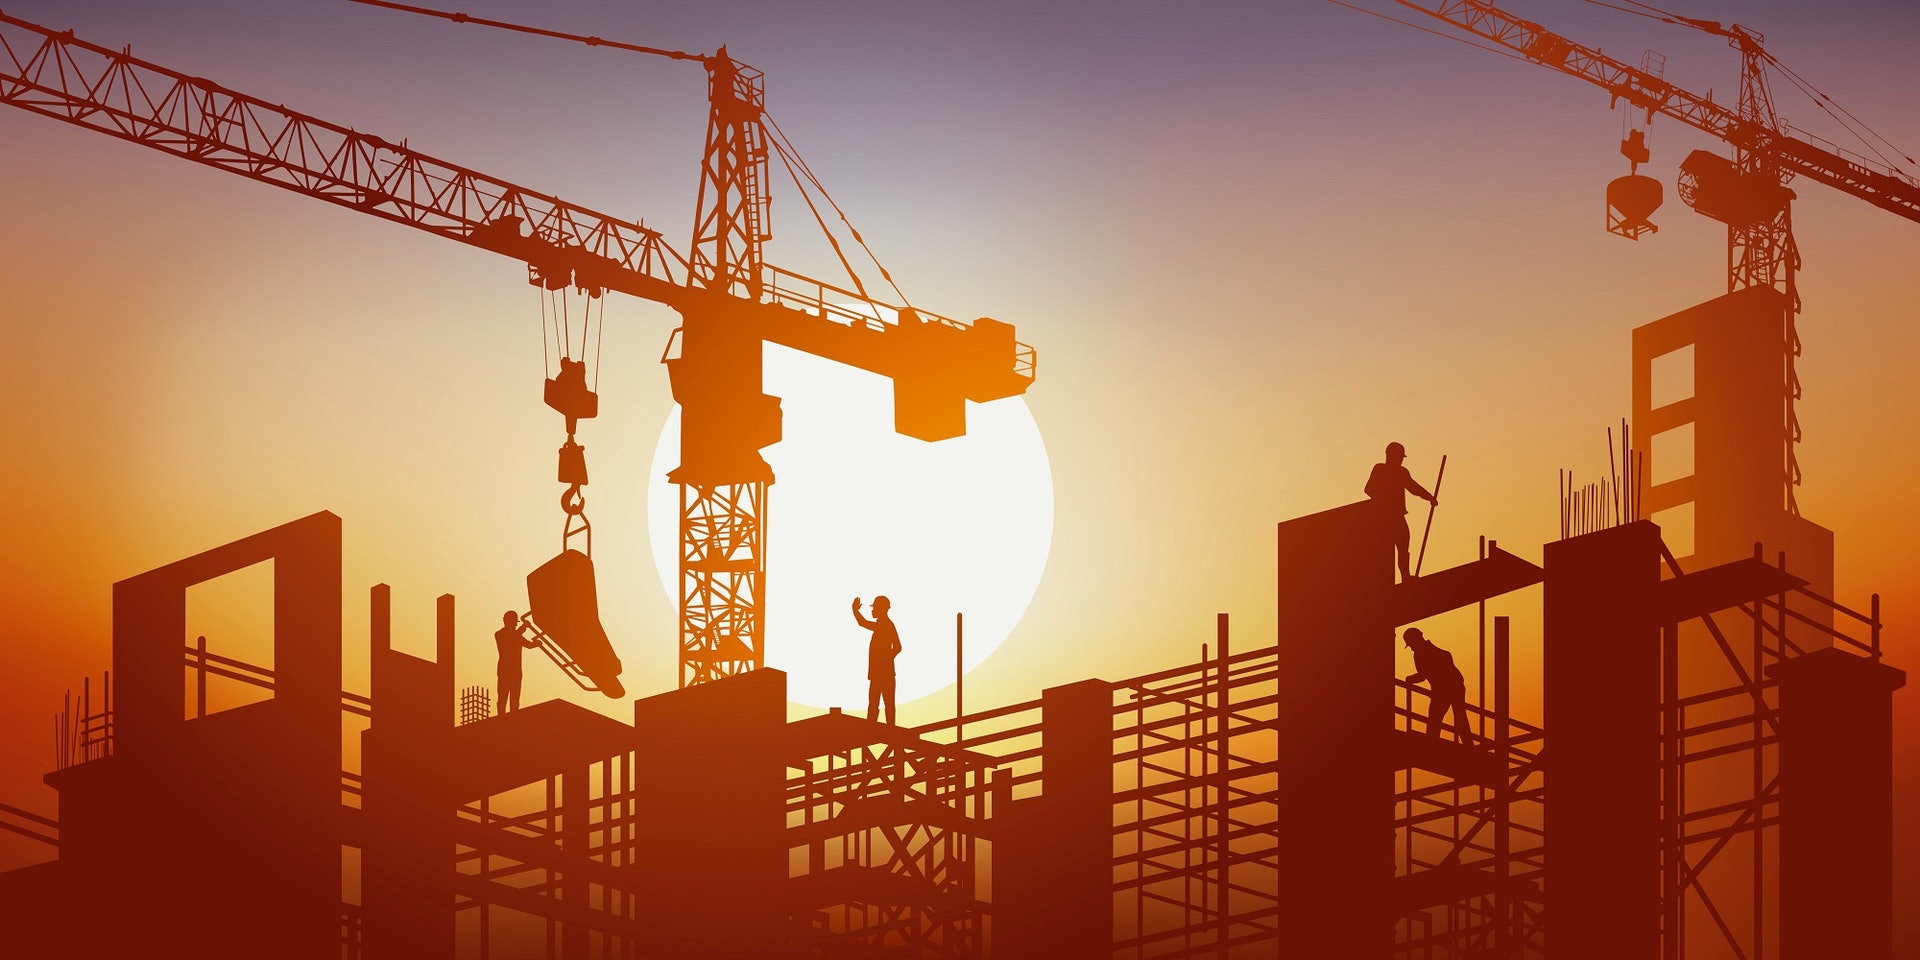 Construction sites rarely see ideal temperatures, and the presence of heat and humidity can quickly turn a safe worksite dangerous if preventative safety measures are not in place.